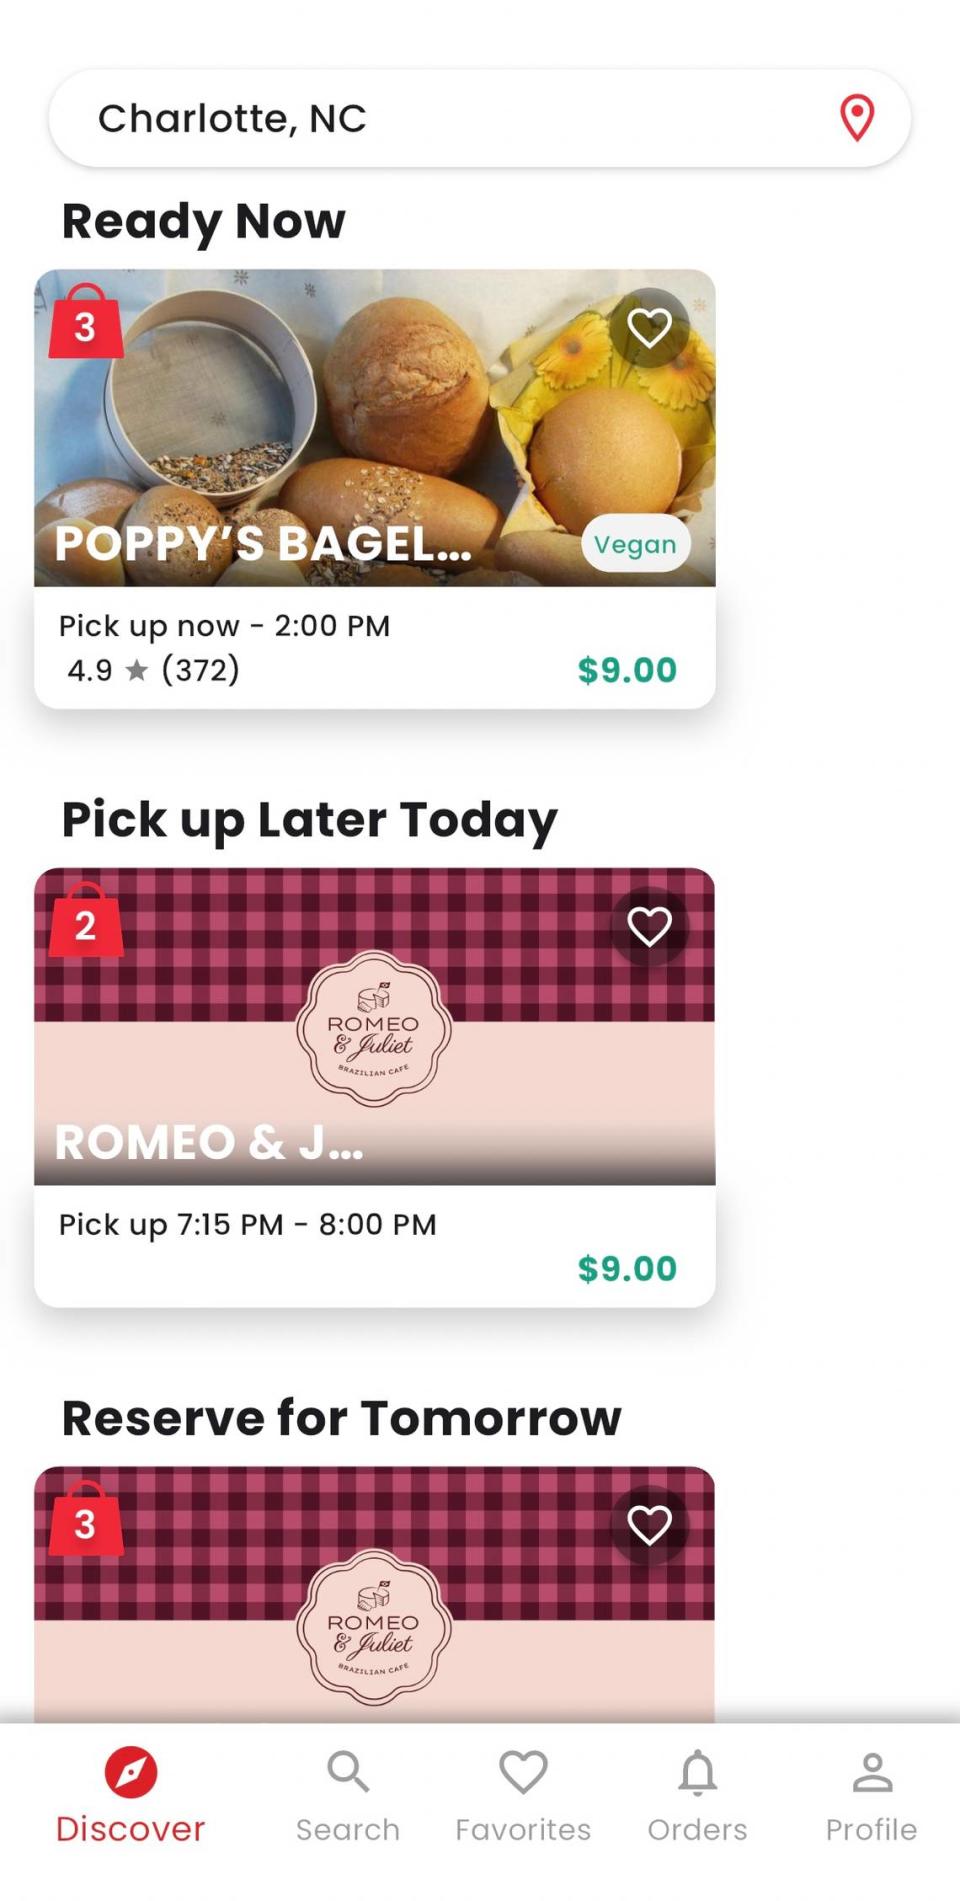 On the Goodie Bag platform, you can order food from over 50 local restaurants and bakeries.